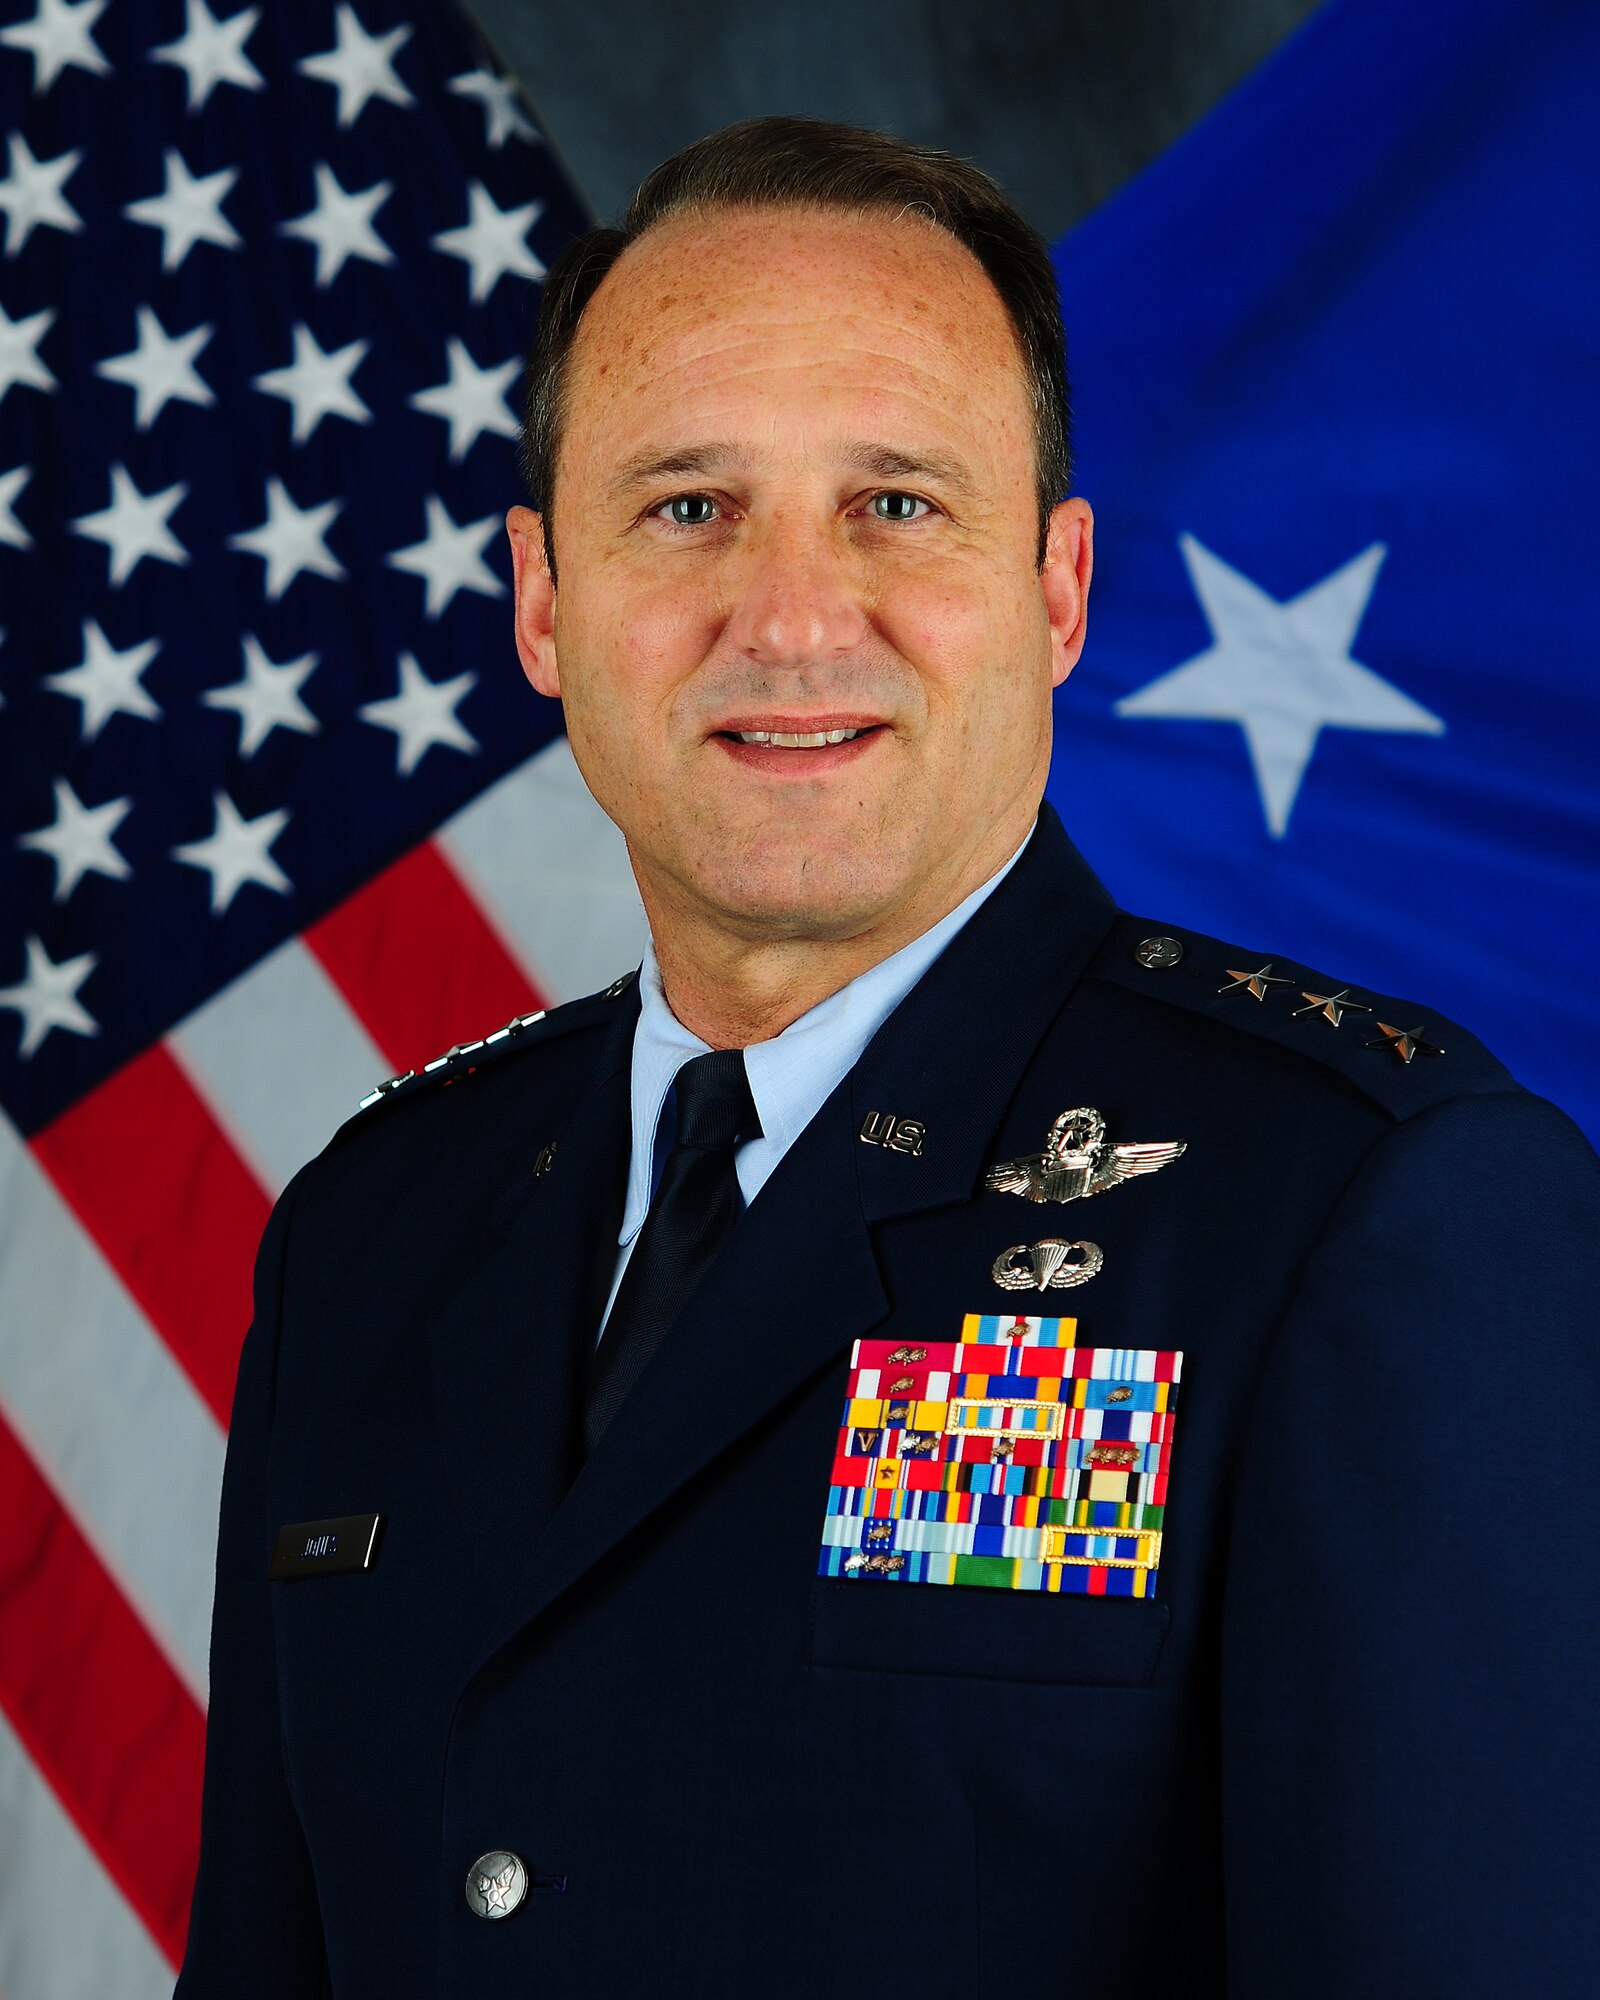 Lt. Gen. Noel T. Jones, U.S. Air Forces in Europe-Air Forces Africa vice commander, asks all Airmen to get involved, step in and prevent sexual assault. U.S. Air Force Courtesy Photo